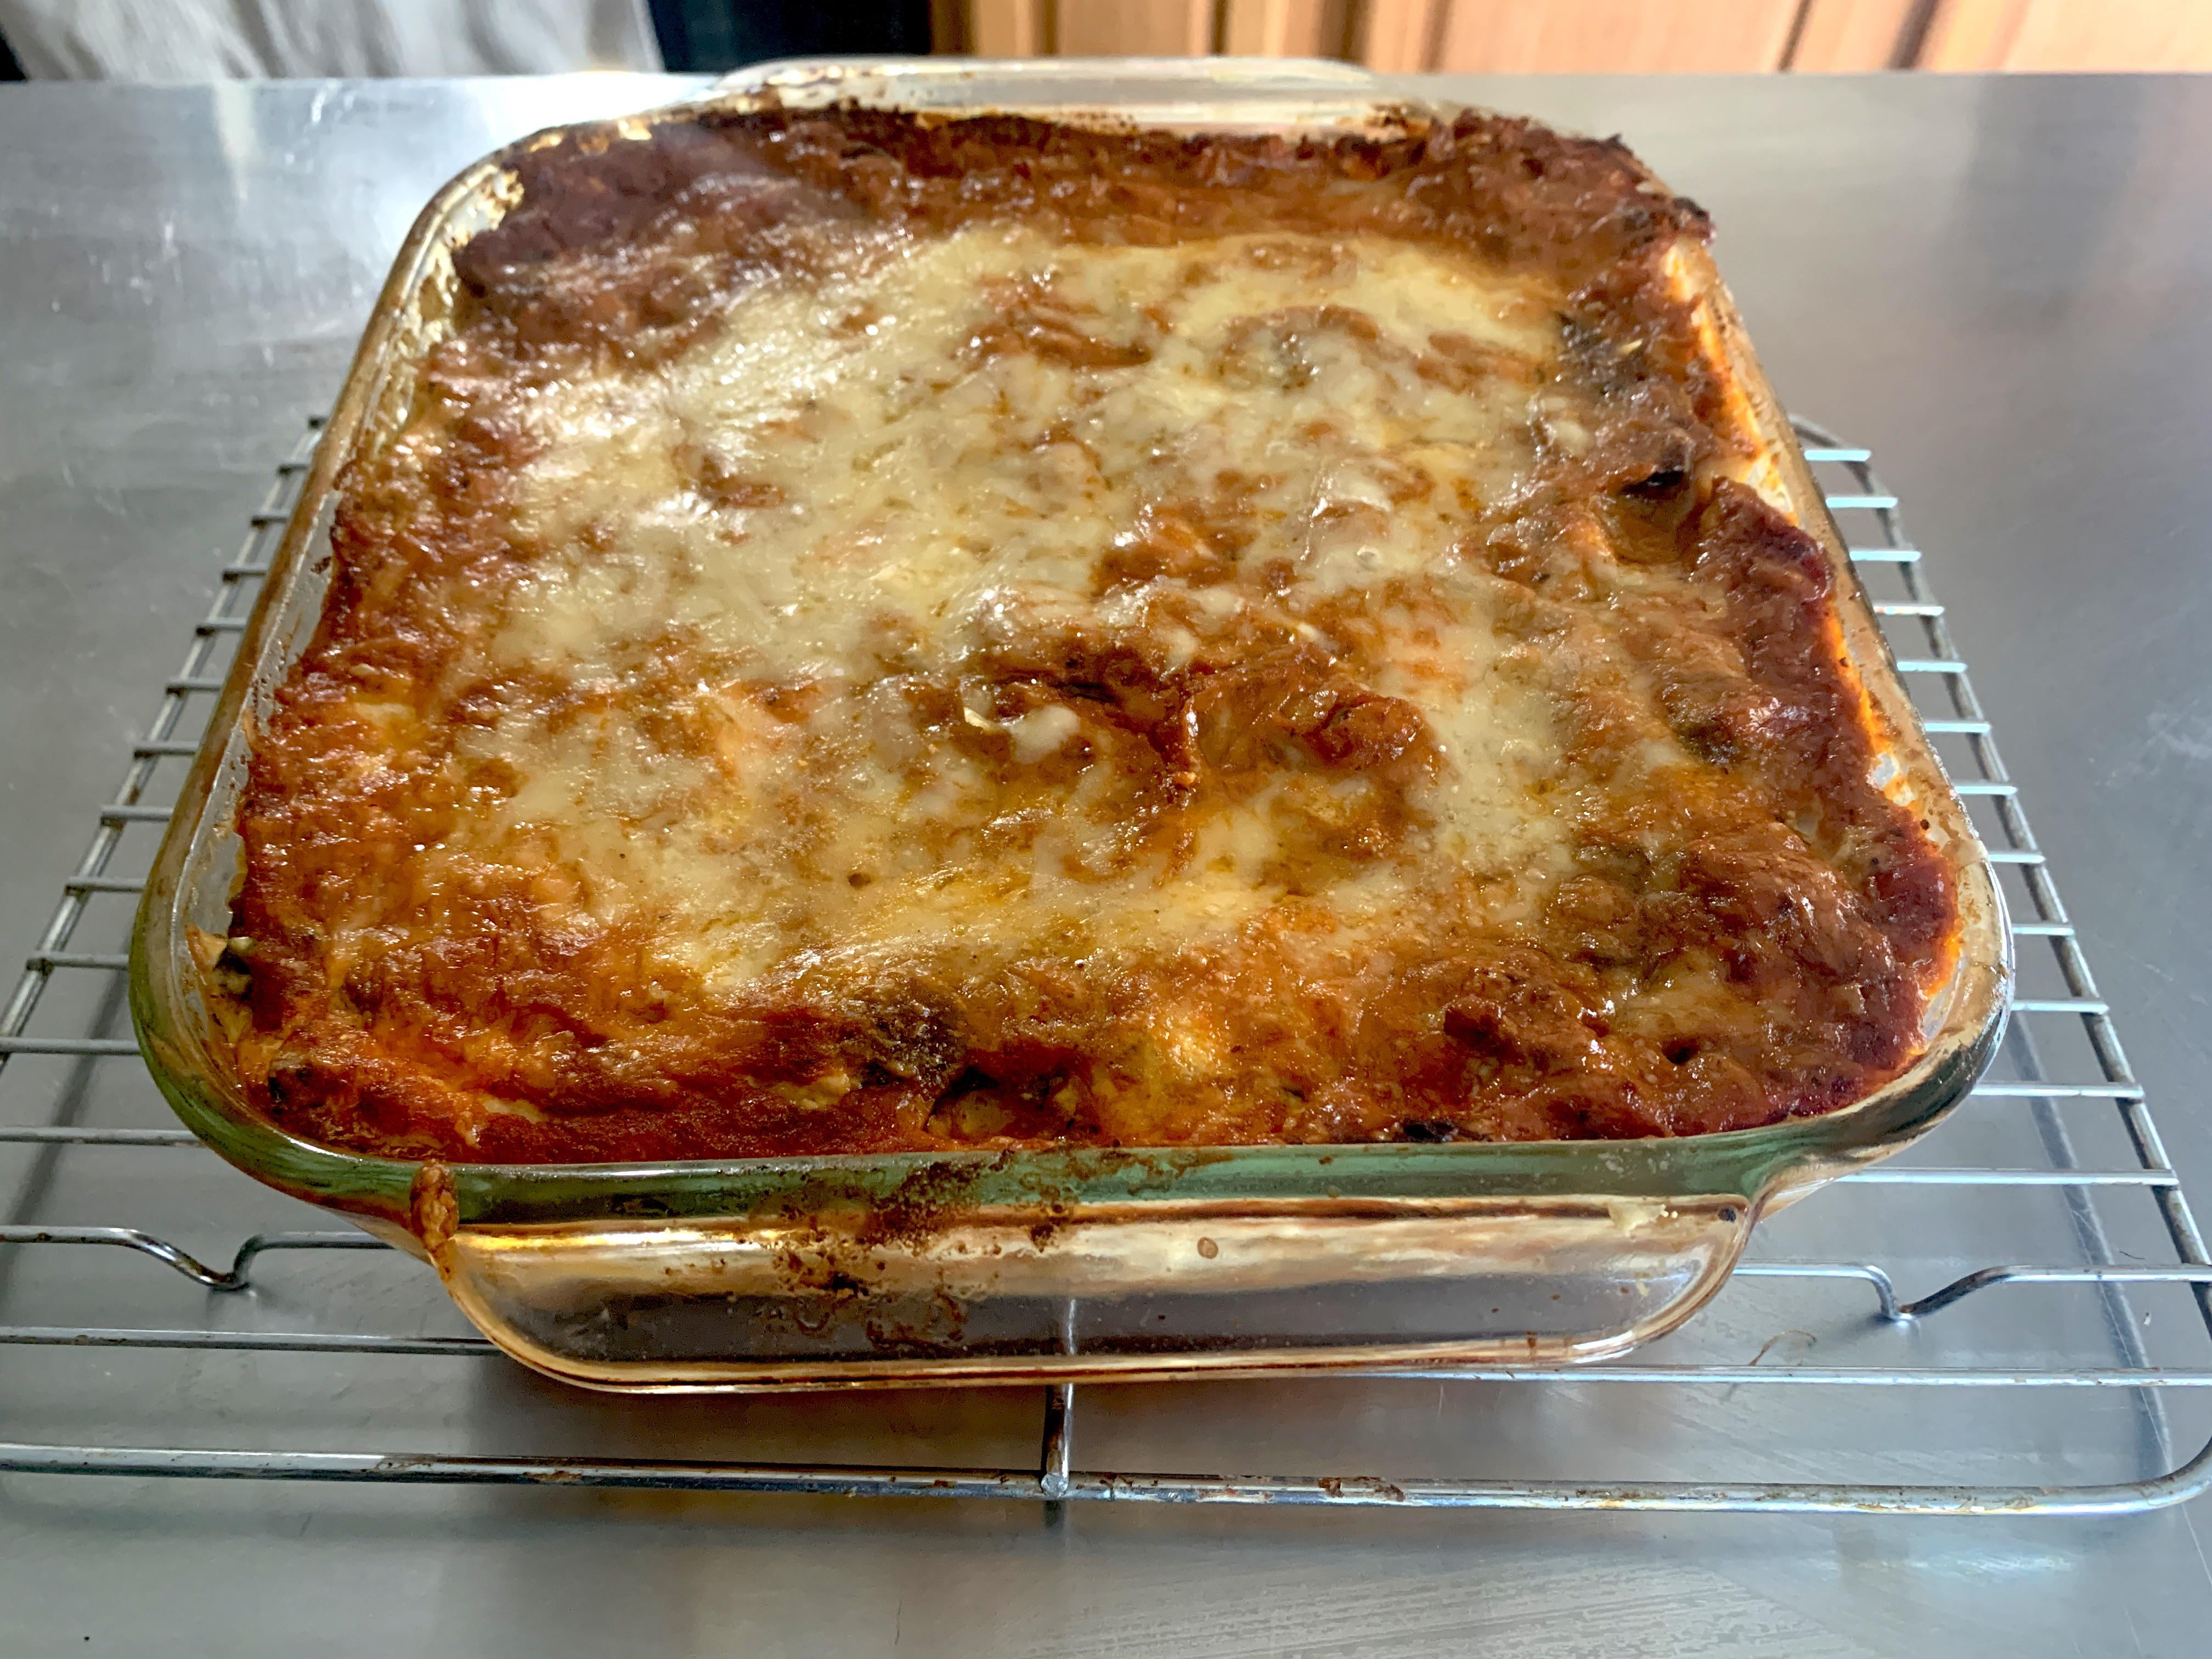 [Homemade] lasagna with gluten free pasta - Dining and Cooking